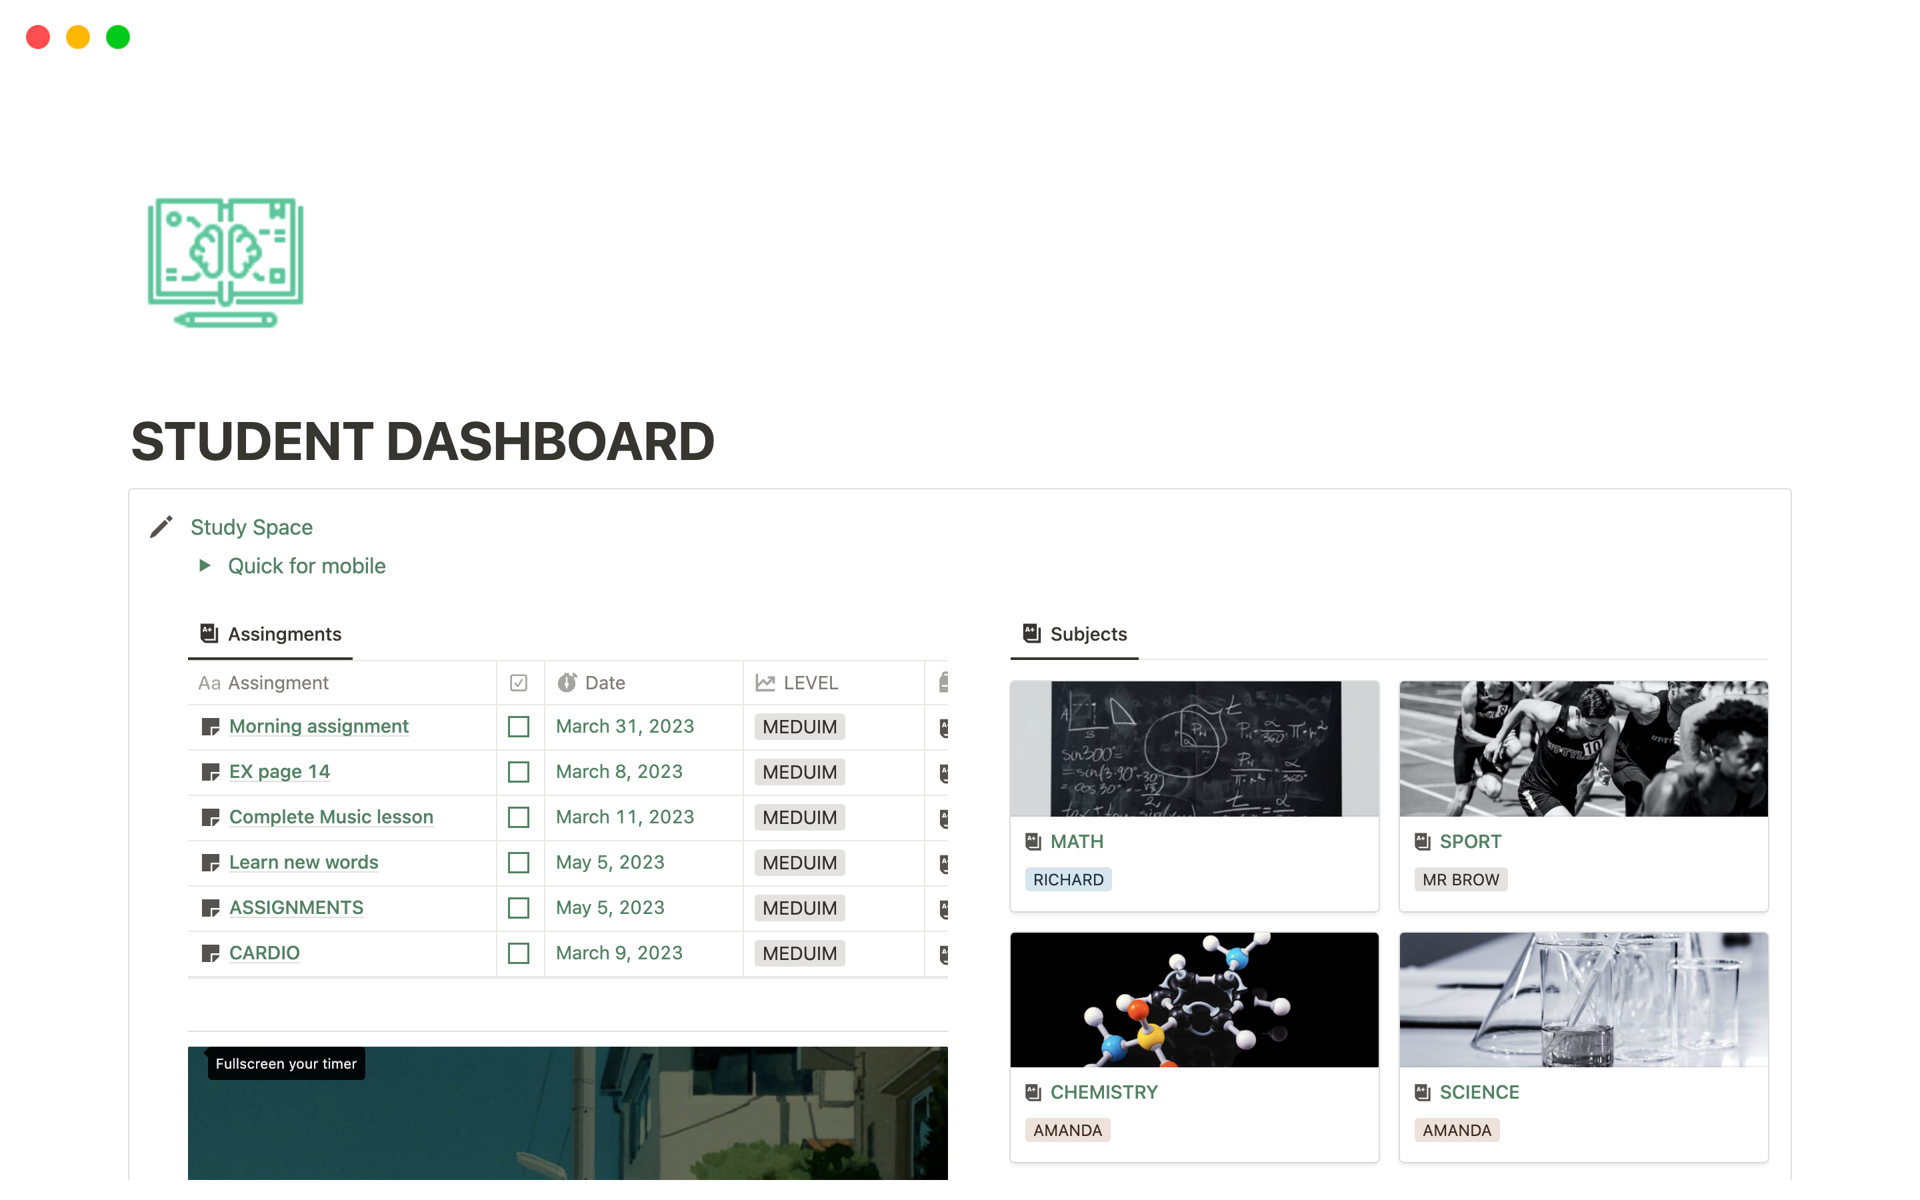 A Notion student dashboard is a customizable tool that allows students to manage and organize their academic responsibilities